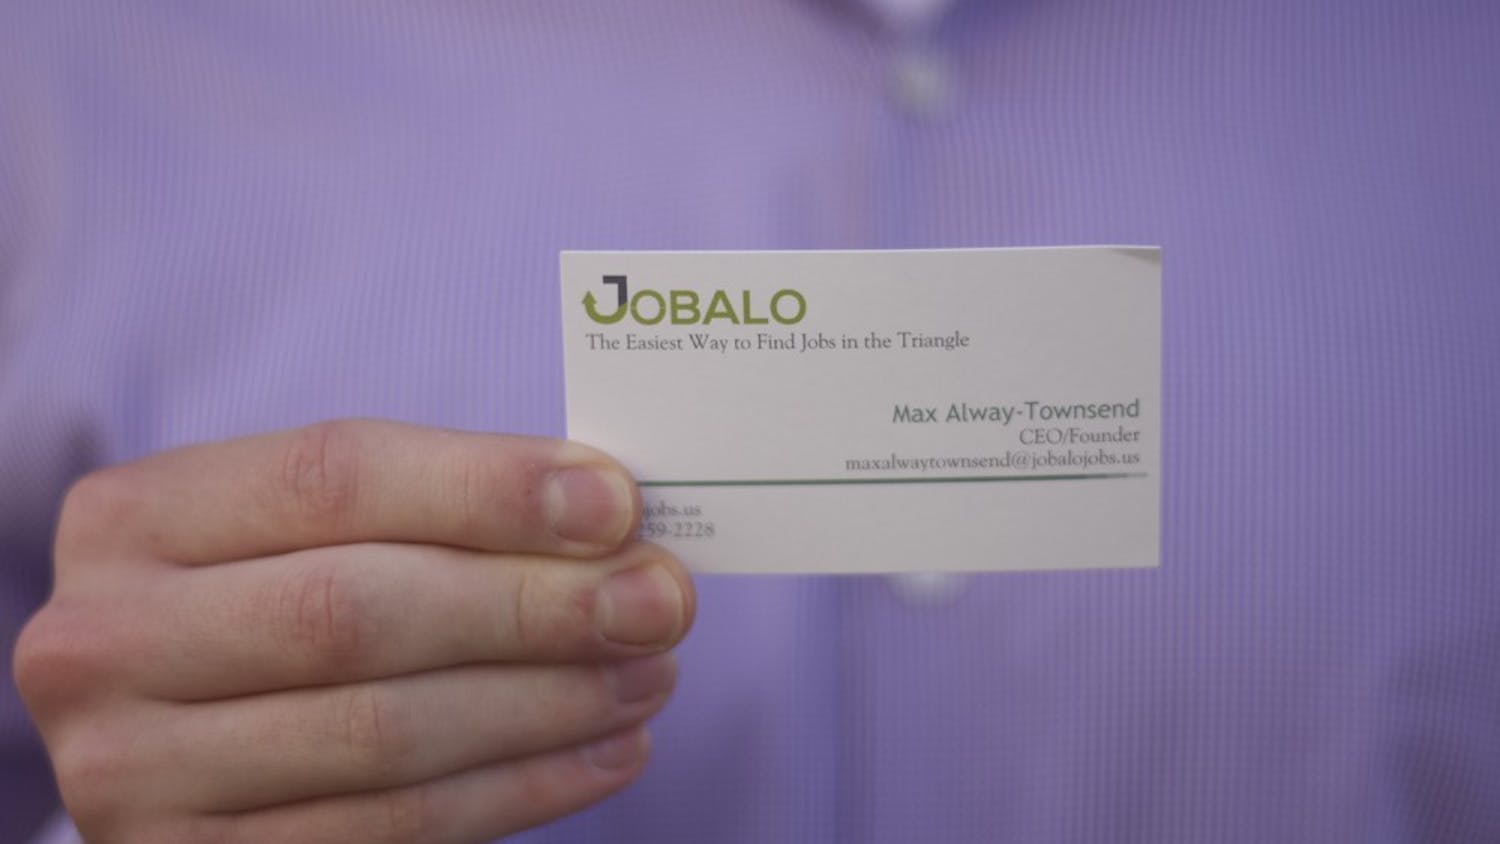 Max is a young entrepreneur who has launched an app called Jobalo by his junior year in high school. He is also an intern at Team Wealth Investments. 